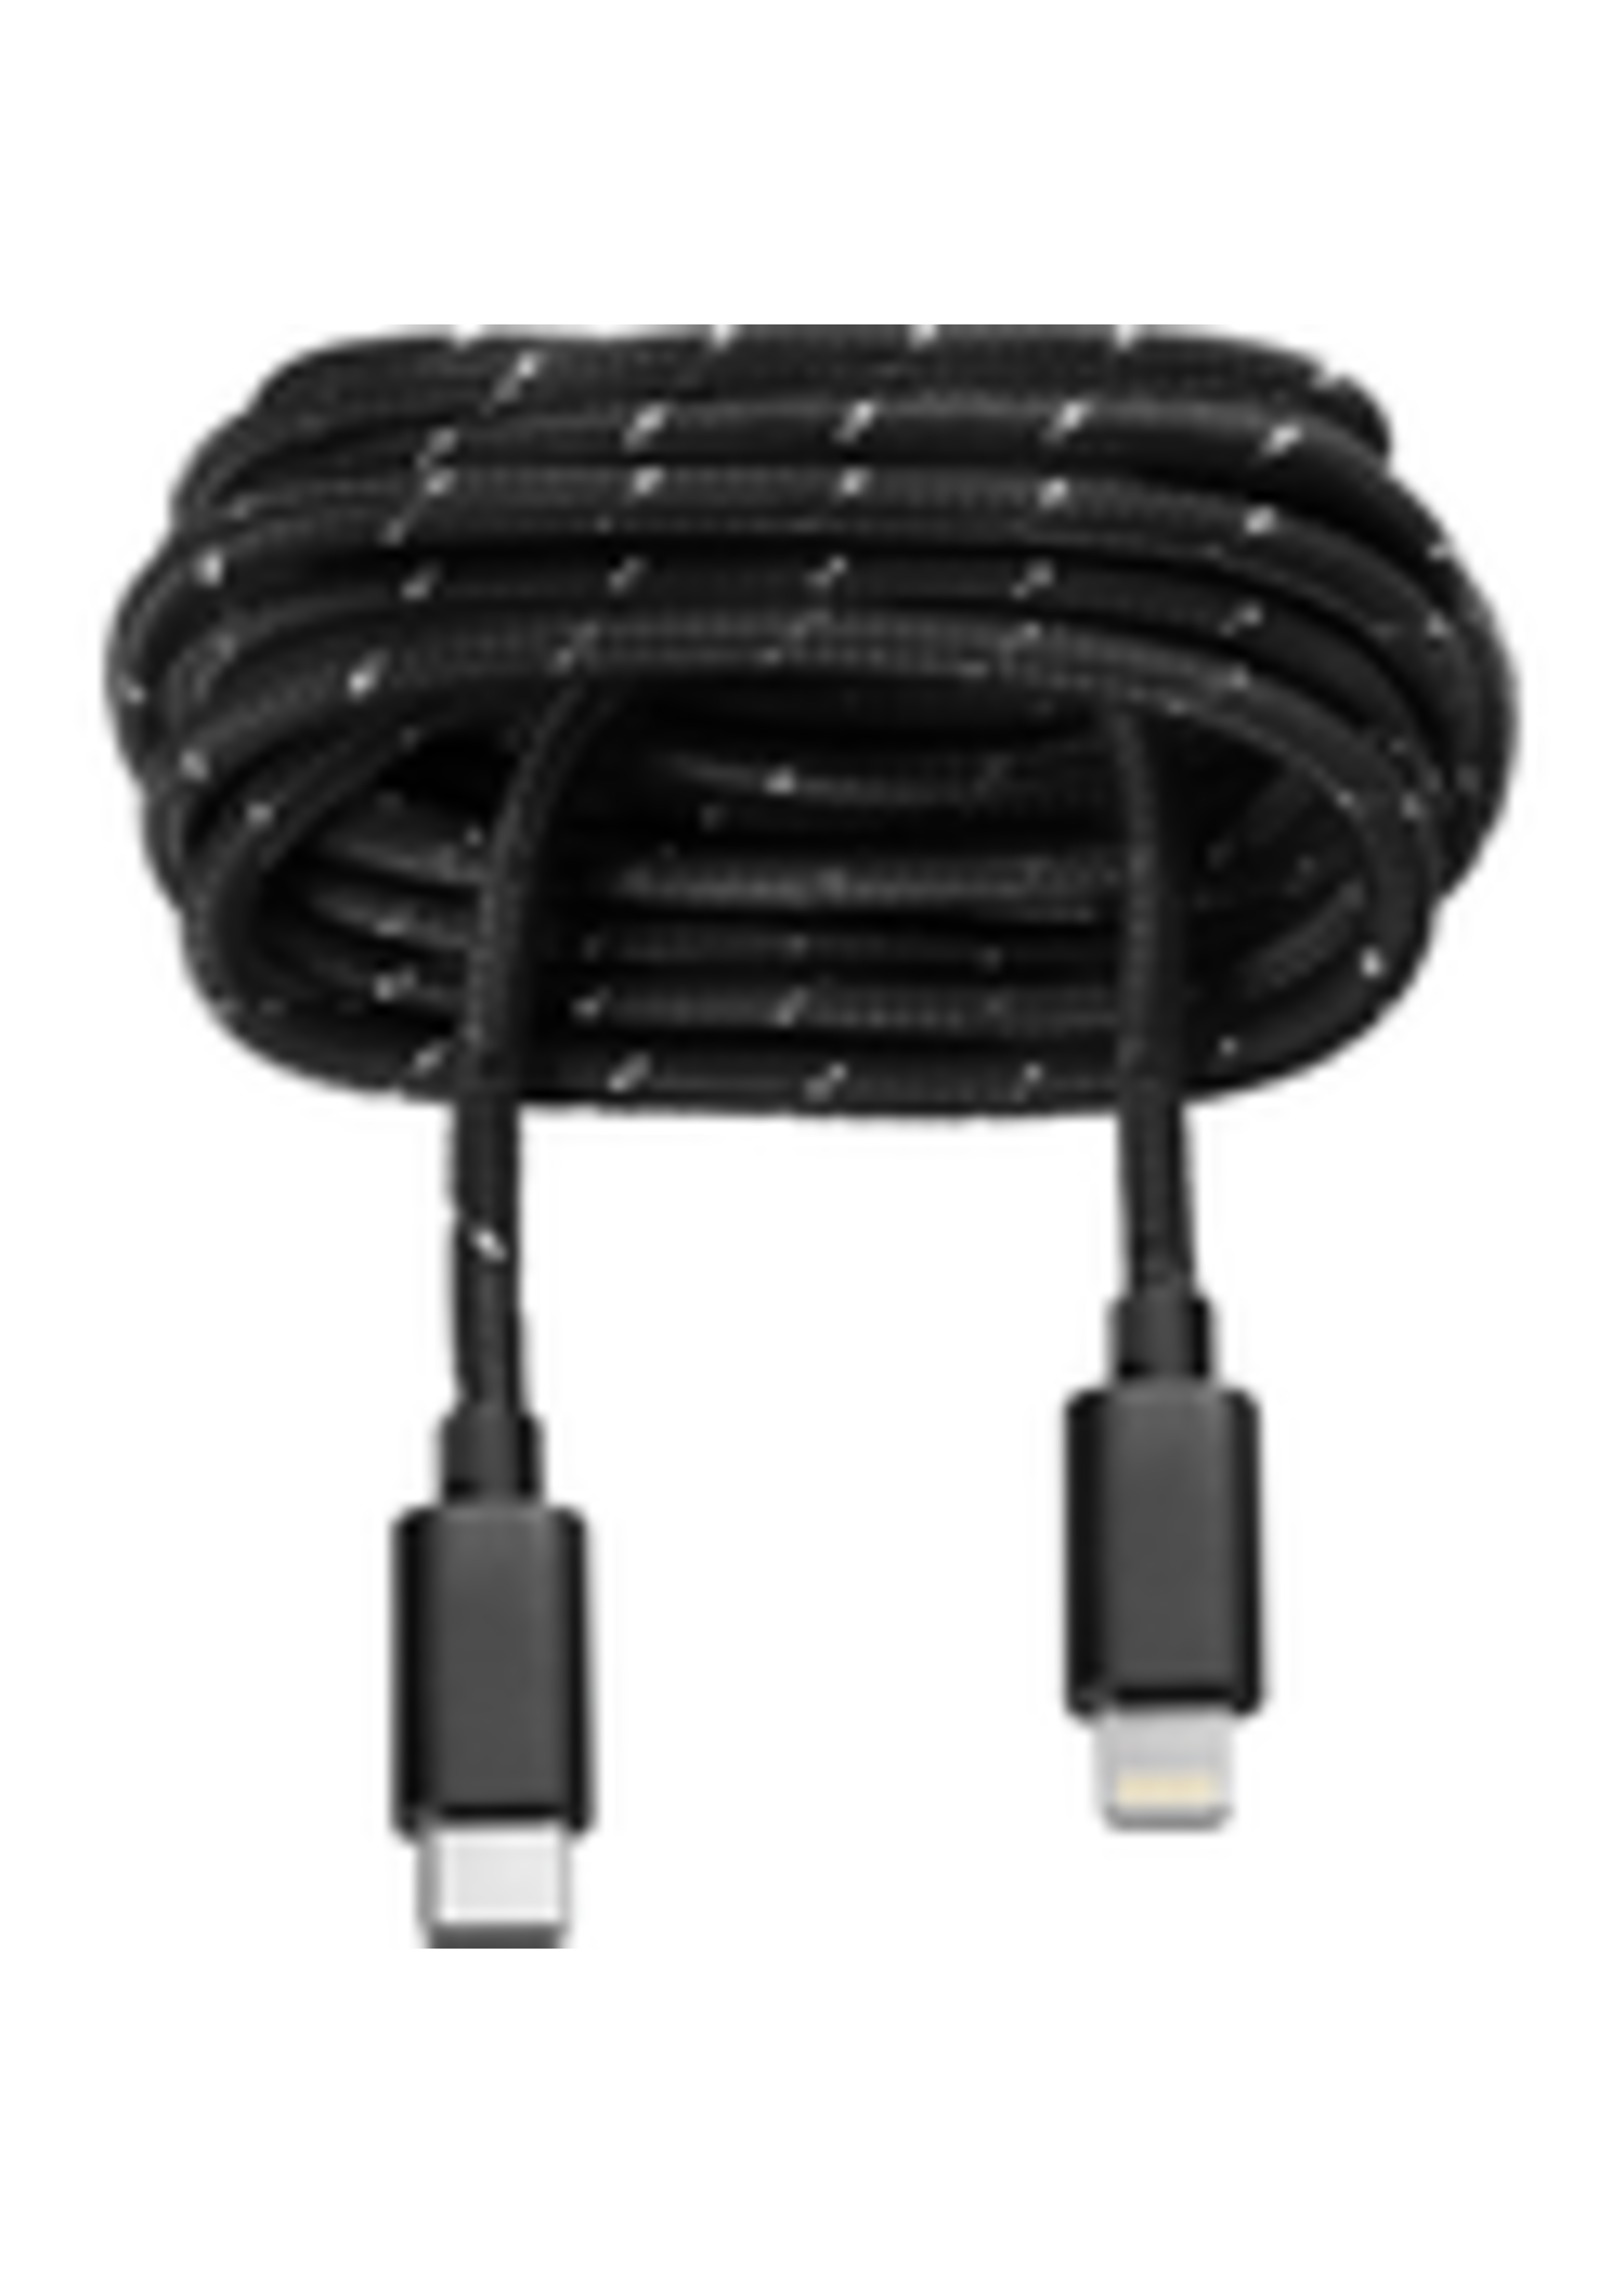 OnHand OnHand Everlasting Nylon Charge and Sync Cable Black 5ft USB-C to Lightning (MFi certified)